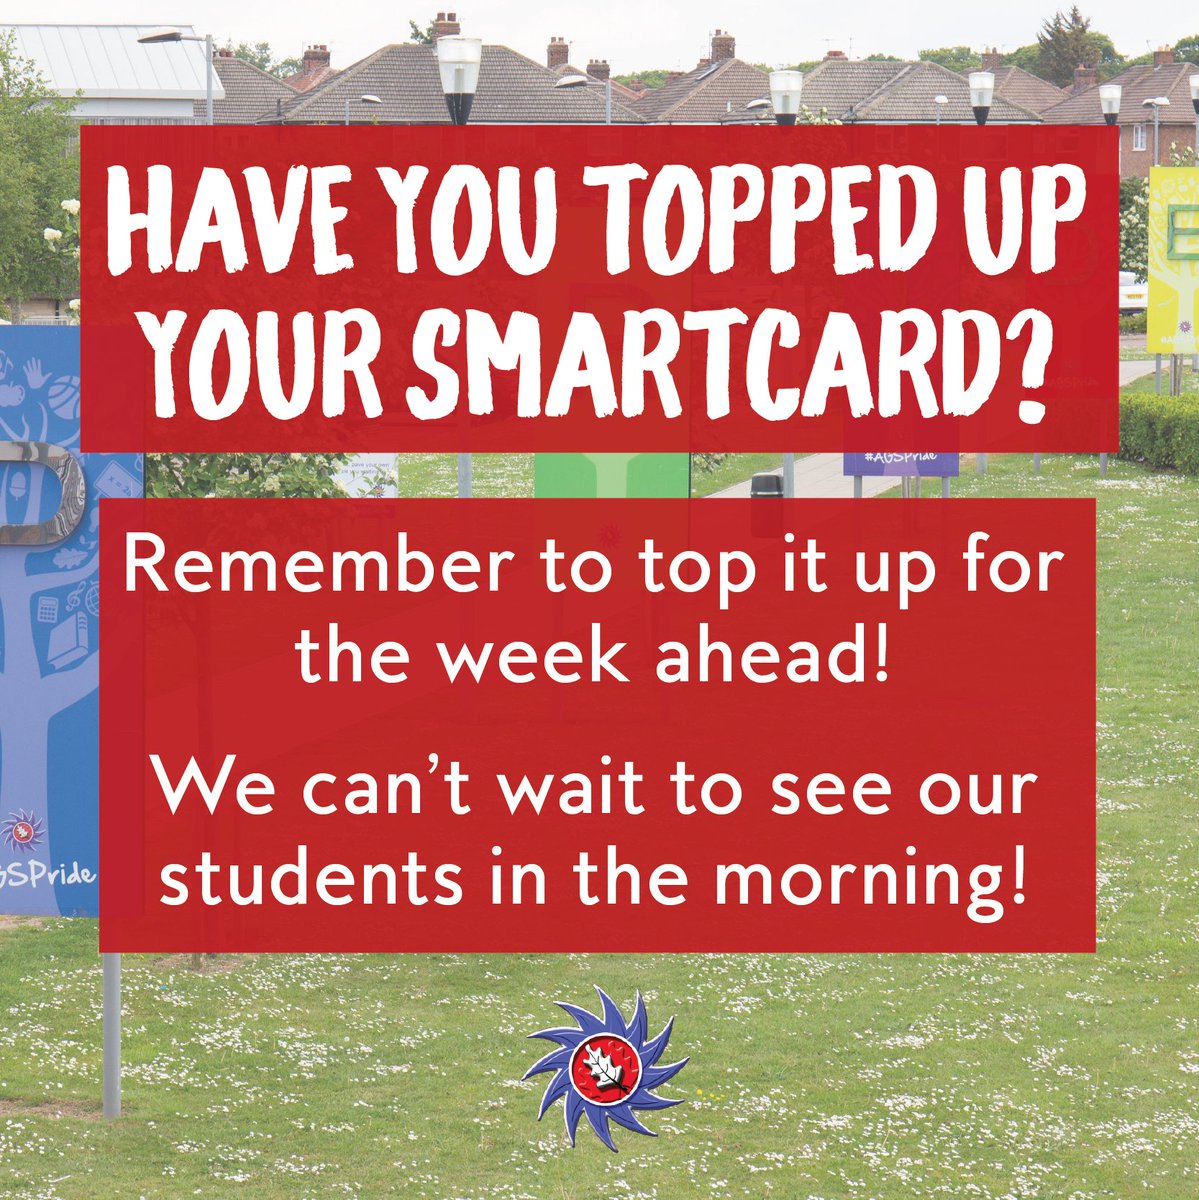 Another great week underway! 👏 Have you topped up your smartcard? Remember to top it up for the week ahead! Don't forget we offer FREE breakfast everyday from 8am